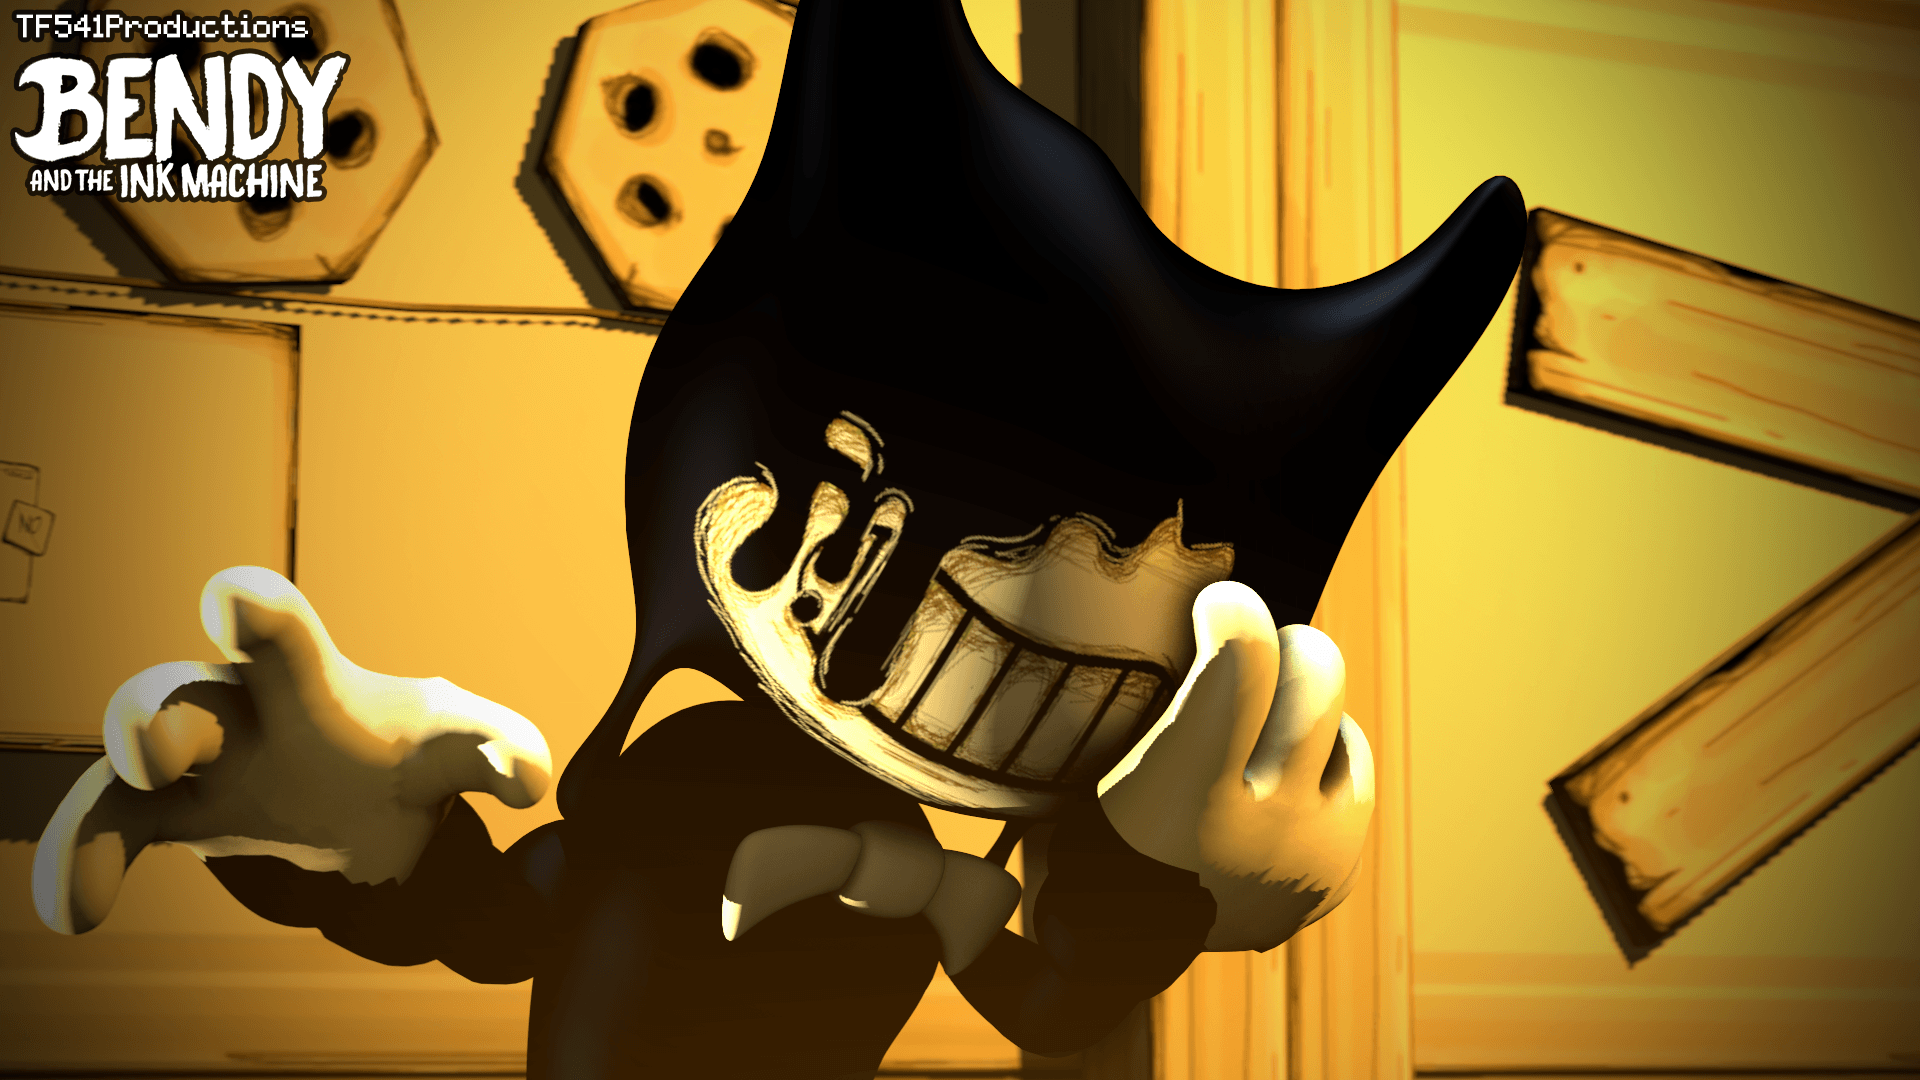 C4D. Wallpaper. Bendy and the Ink Machine